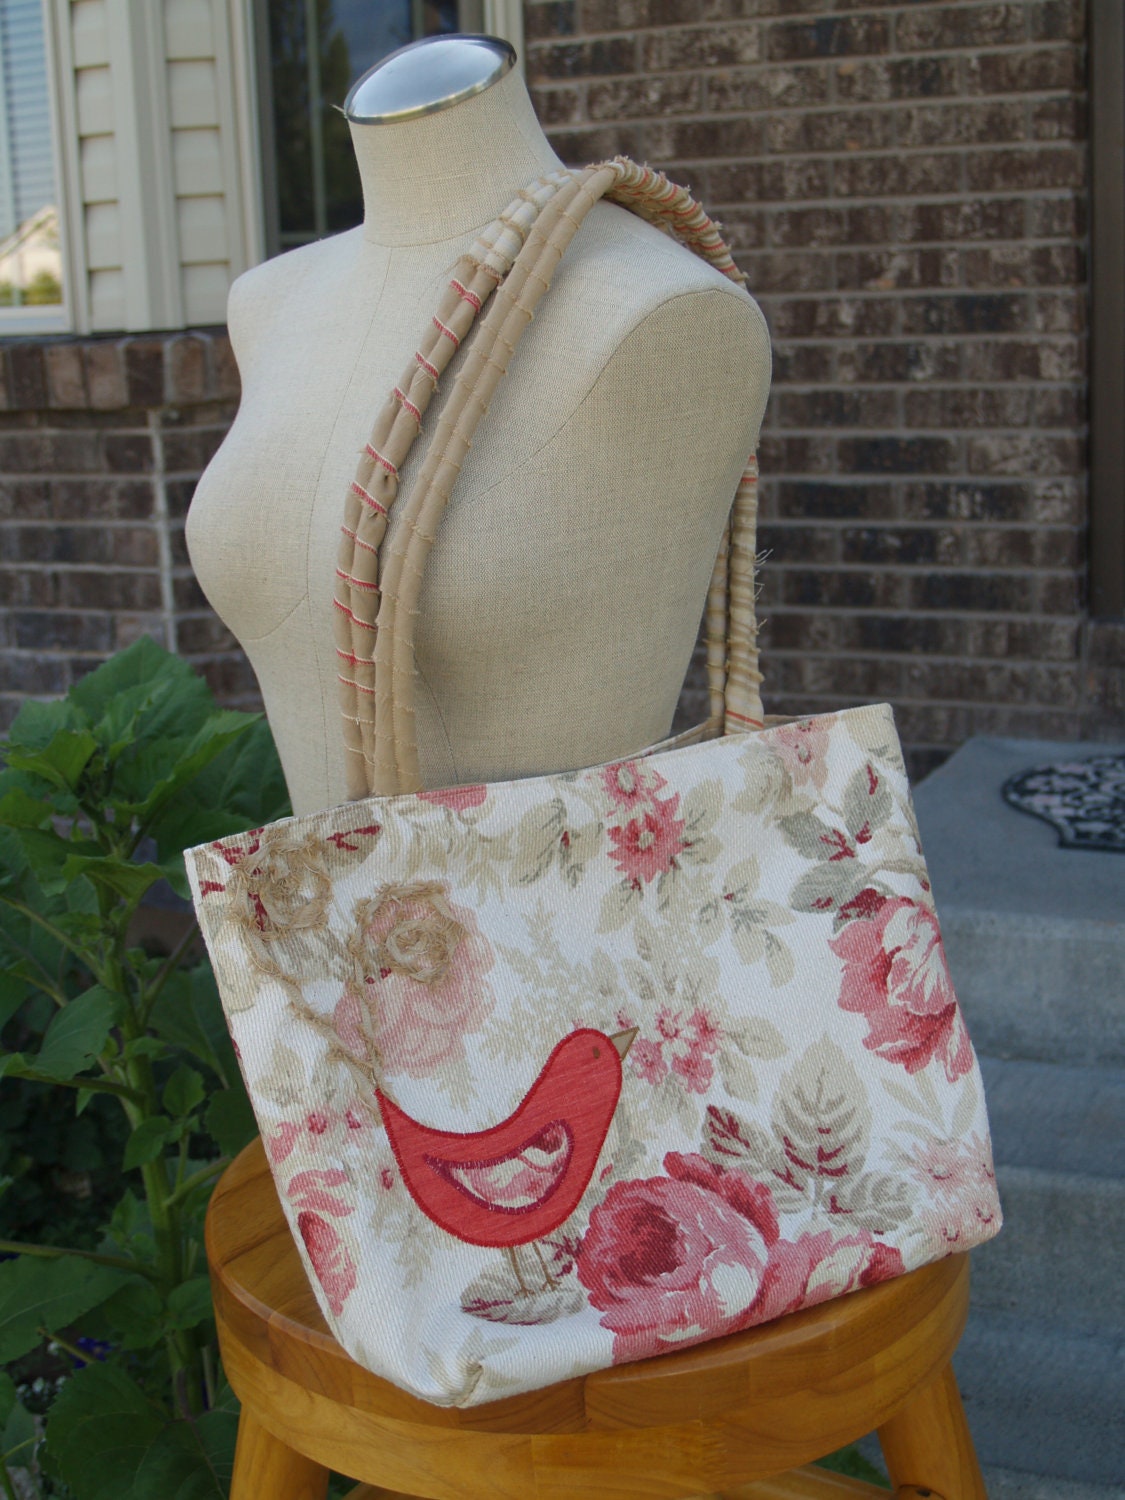 Hand Made Large Pink and White Floral Purse with Appliqued Bird